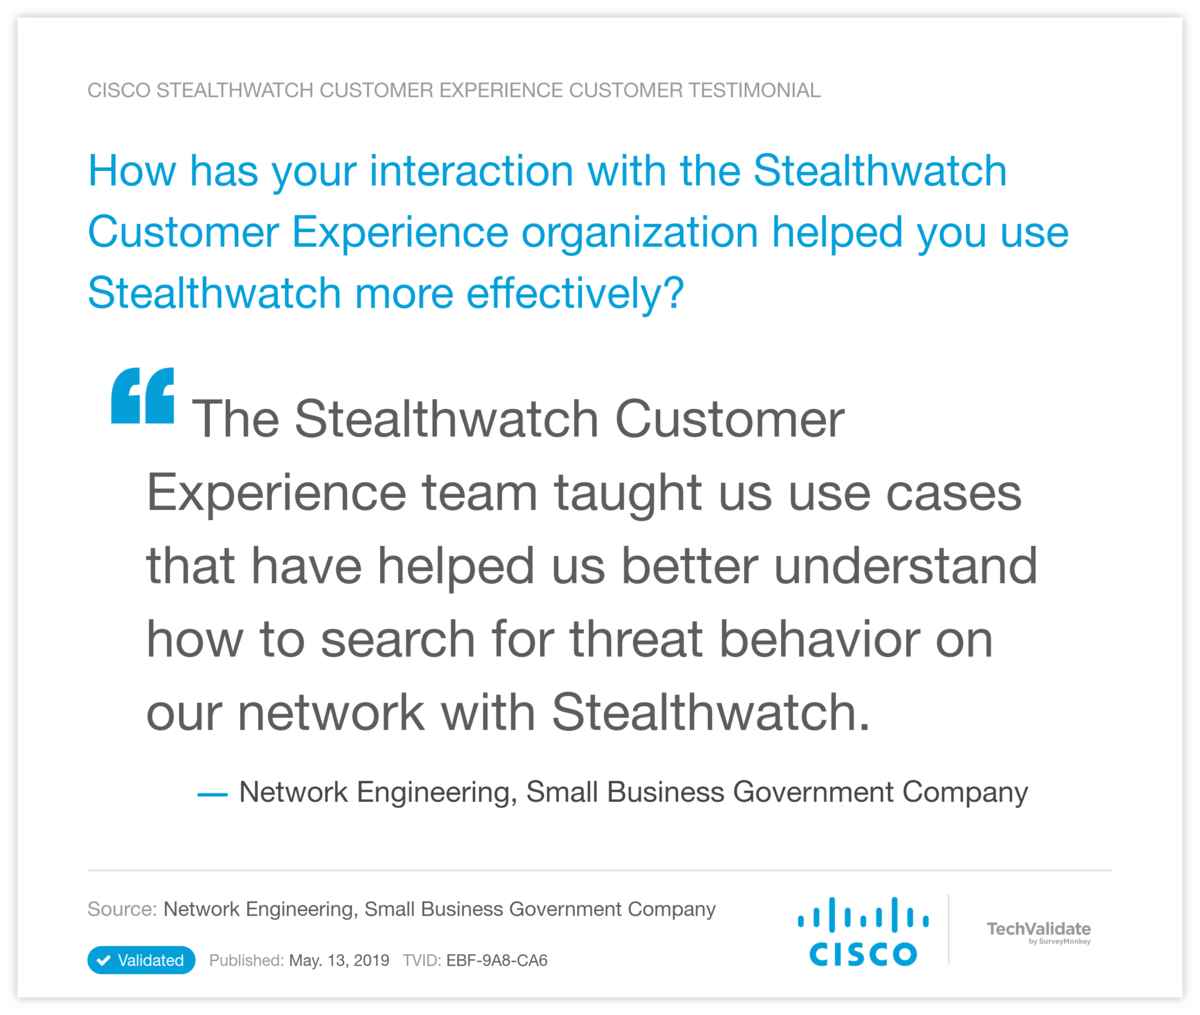 How has your interaction with the Stealthwatch Customer Experience organization helped you use Stealthwatch more effectively?